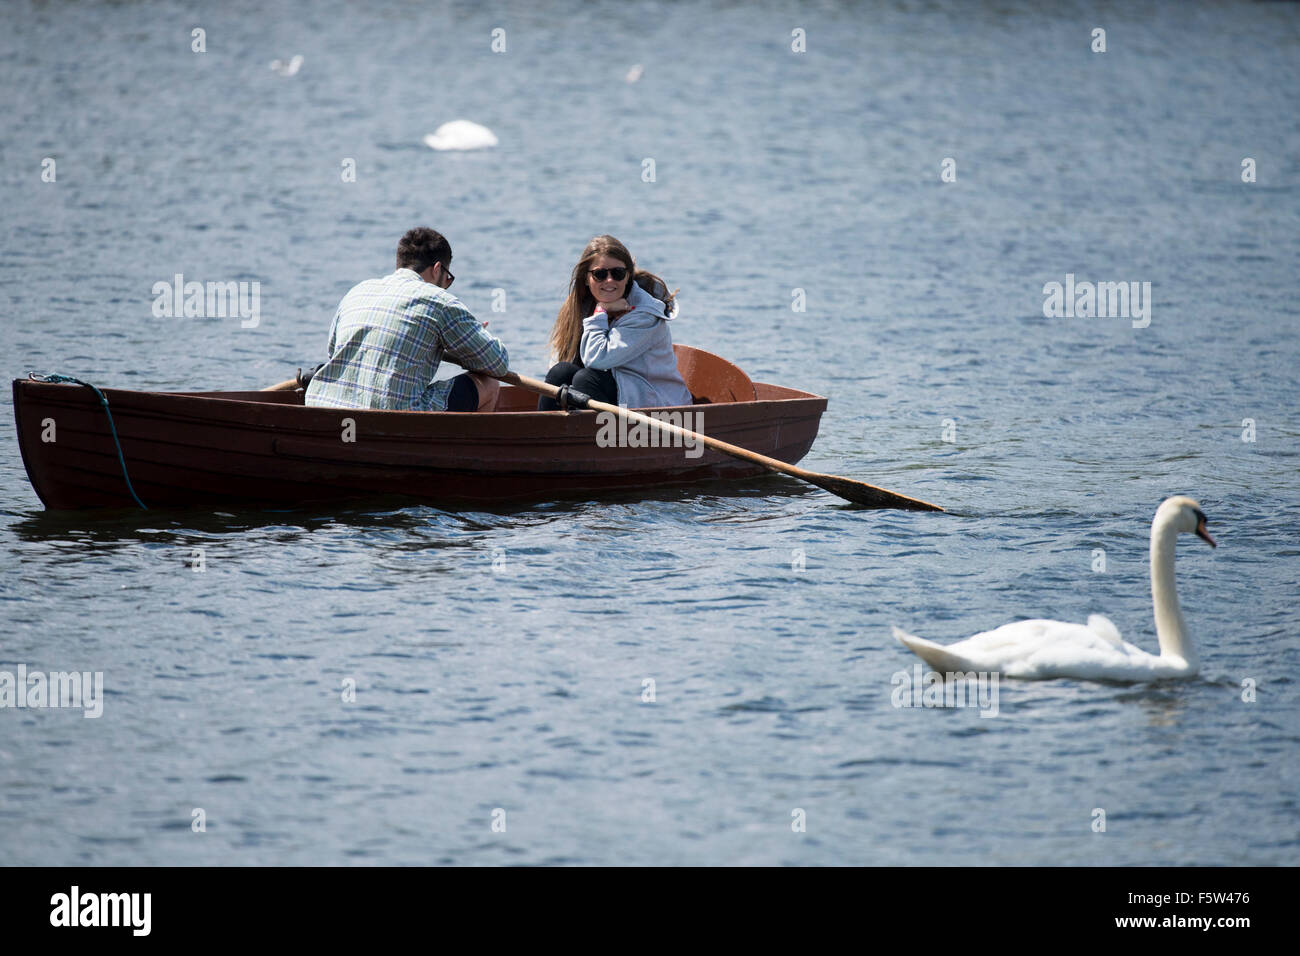 A couple in a rowing boat in Roath Park Lake, Cardiff, South Wales, during warm sunny weather. Stock Photo